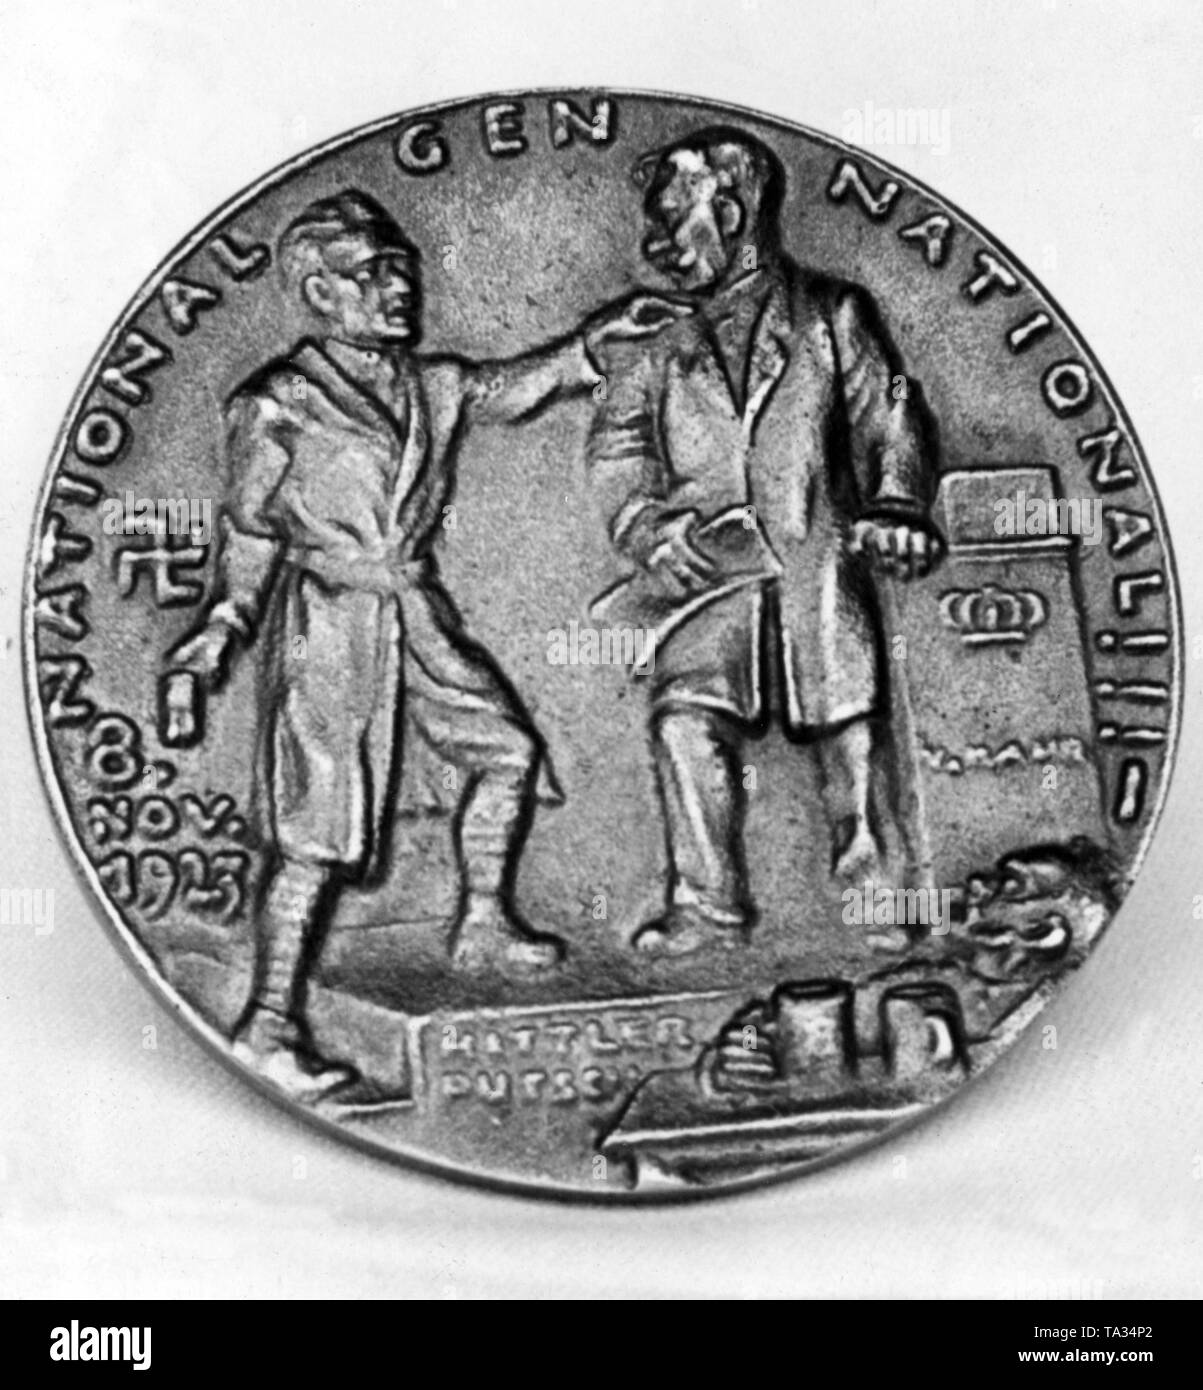 Back of a medal on the Beer Hall Putsch by Karl Goetz. The Beer Hall Putsch is depicted as the 'Munich Theater'. Hitler (l.) is at the lectern and Kahr (r.) in the Buergerbraeukeller. In front is a listener with beer mugs on the table. Under the podium is written 'Hitlerputsch'. The inscription reads: '8 Nov. 1923 National Gen National !!!' Stock Photo